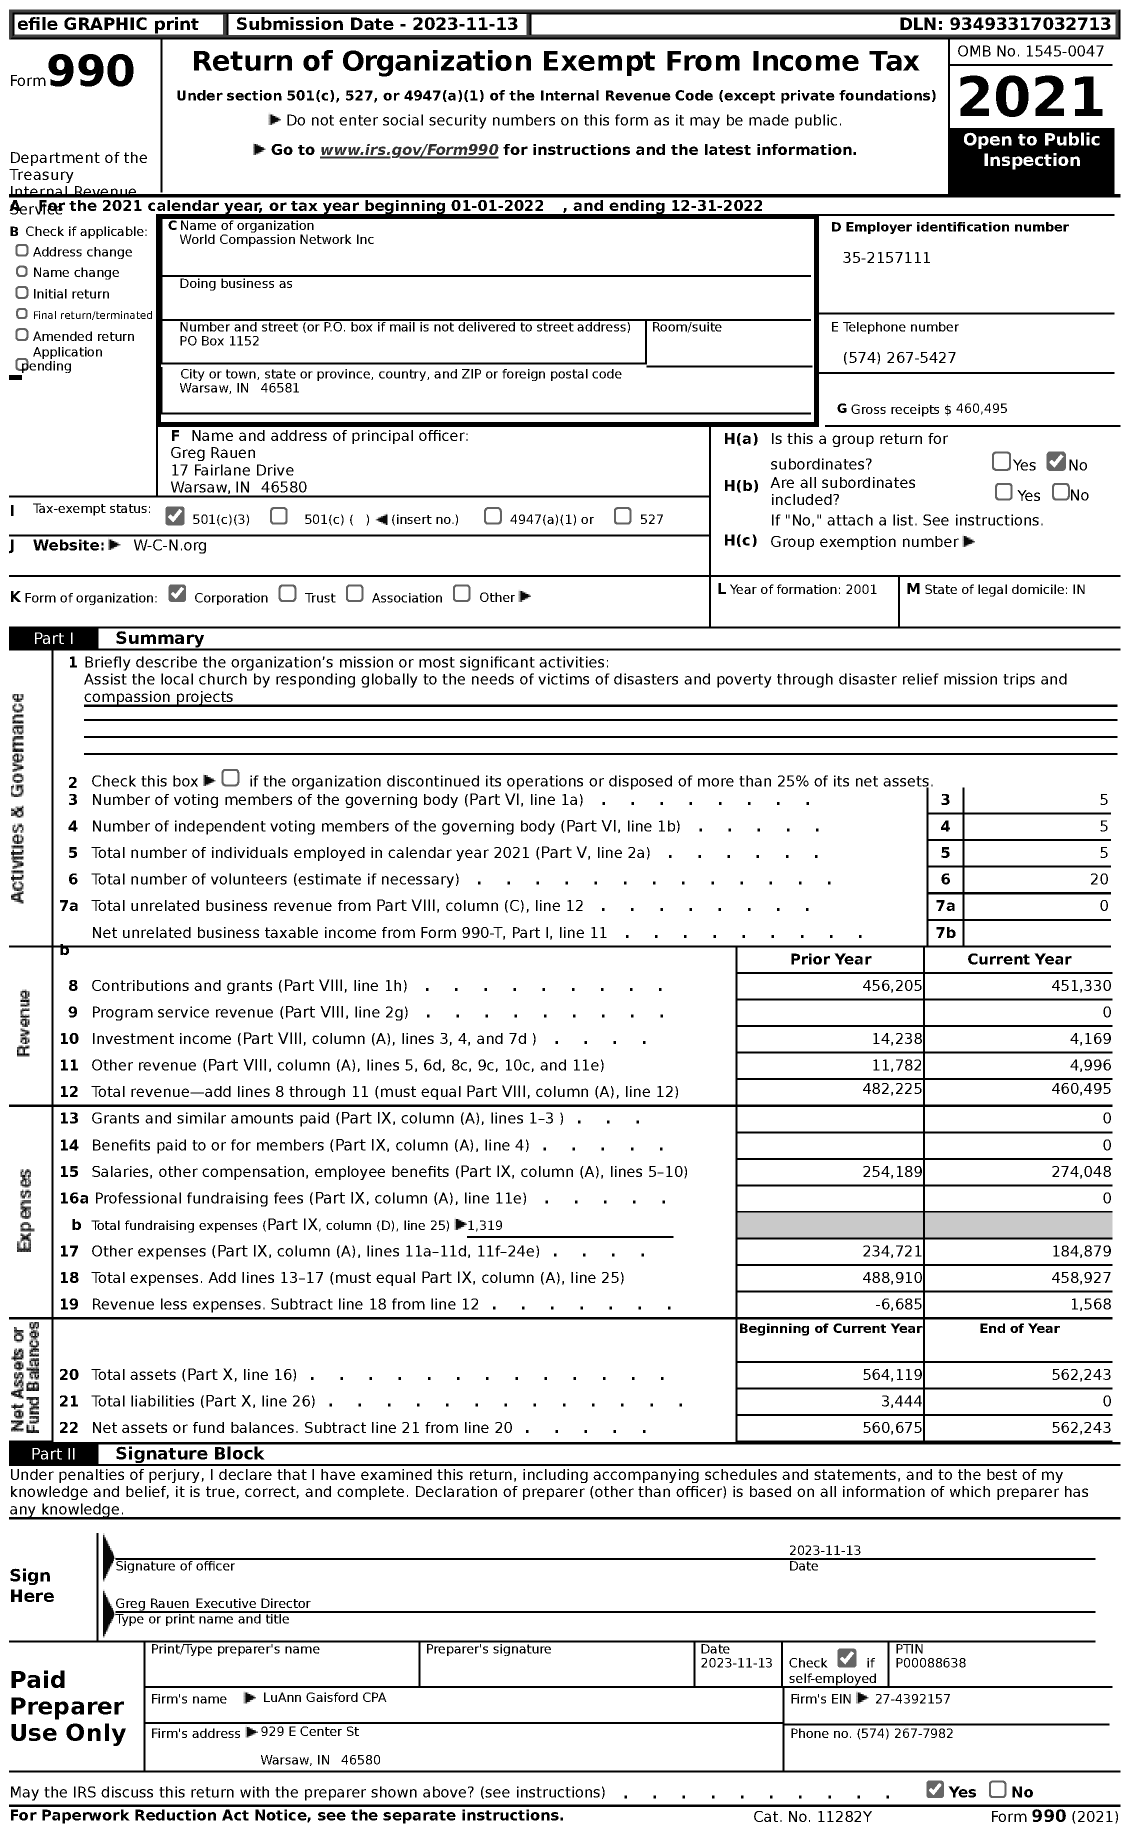 Image of first page of 2022 Form 990 for World Compassion Network